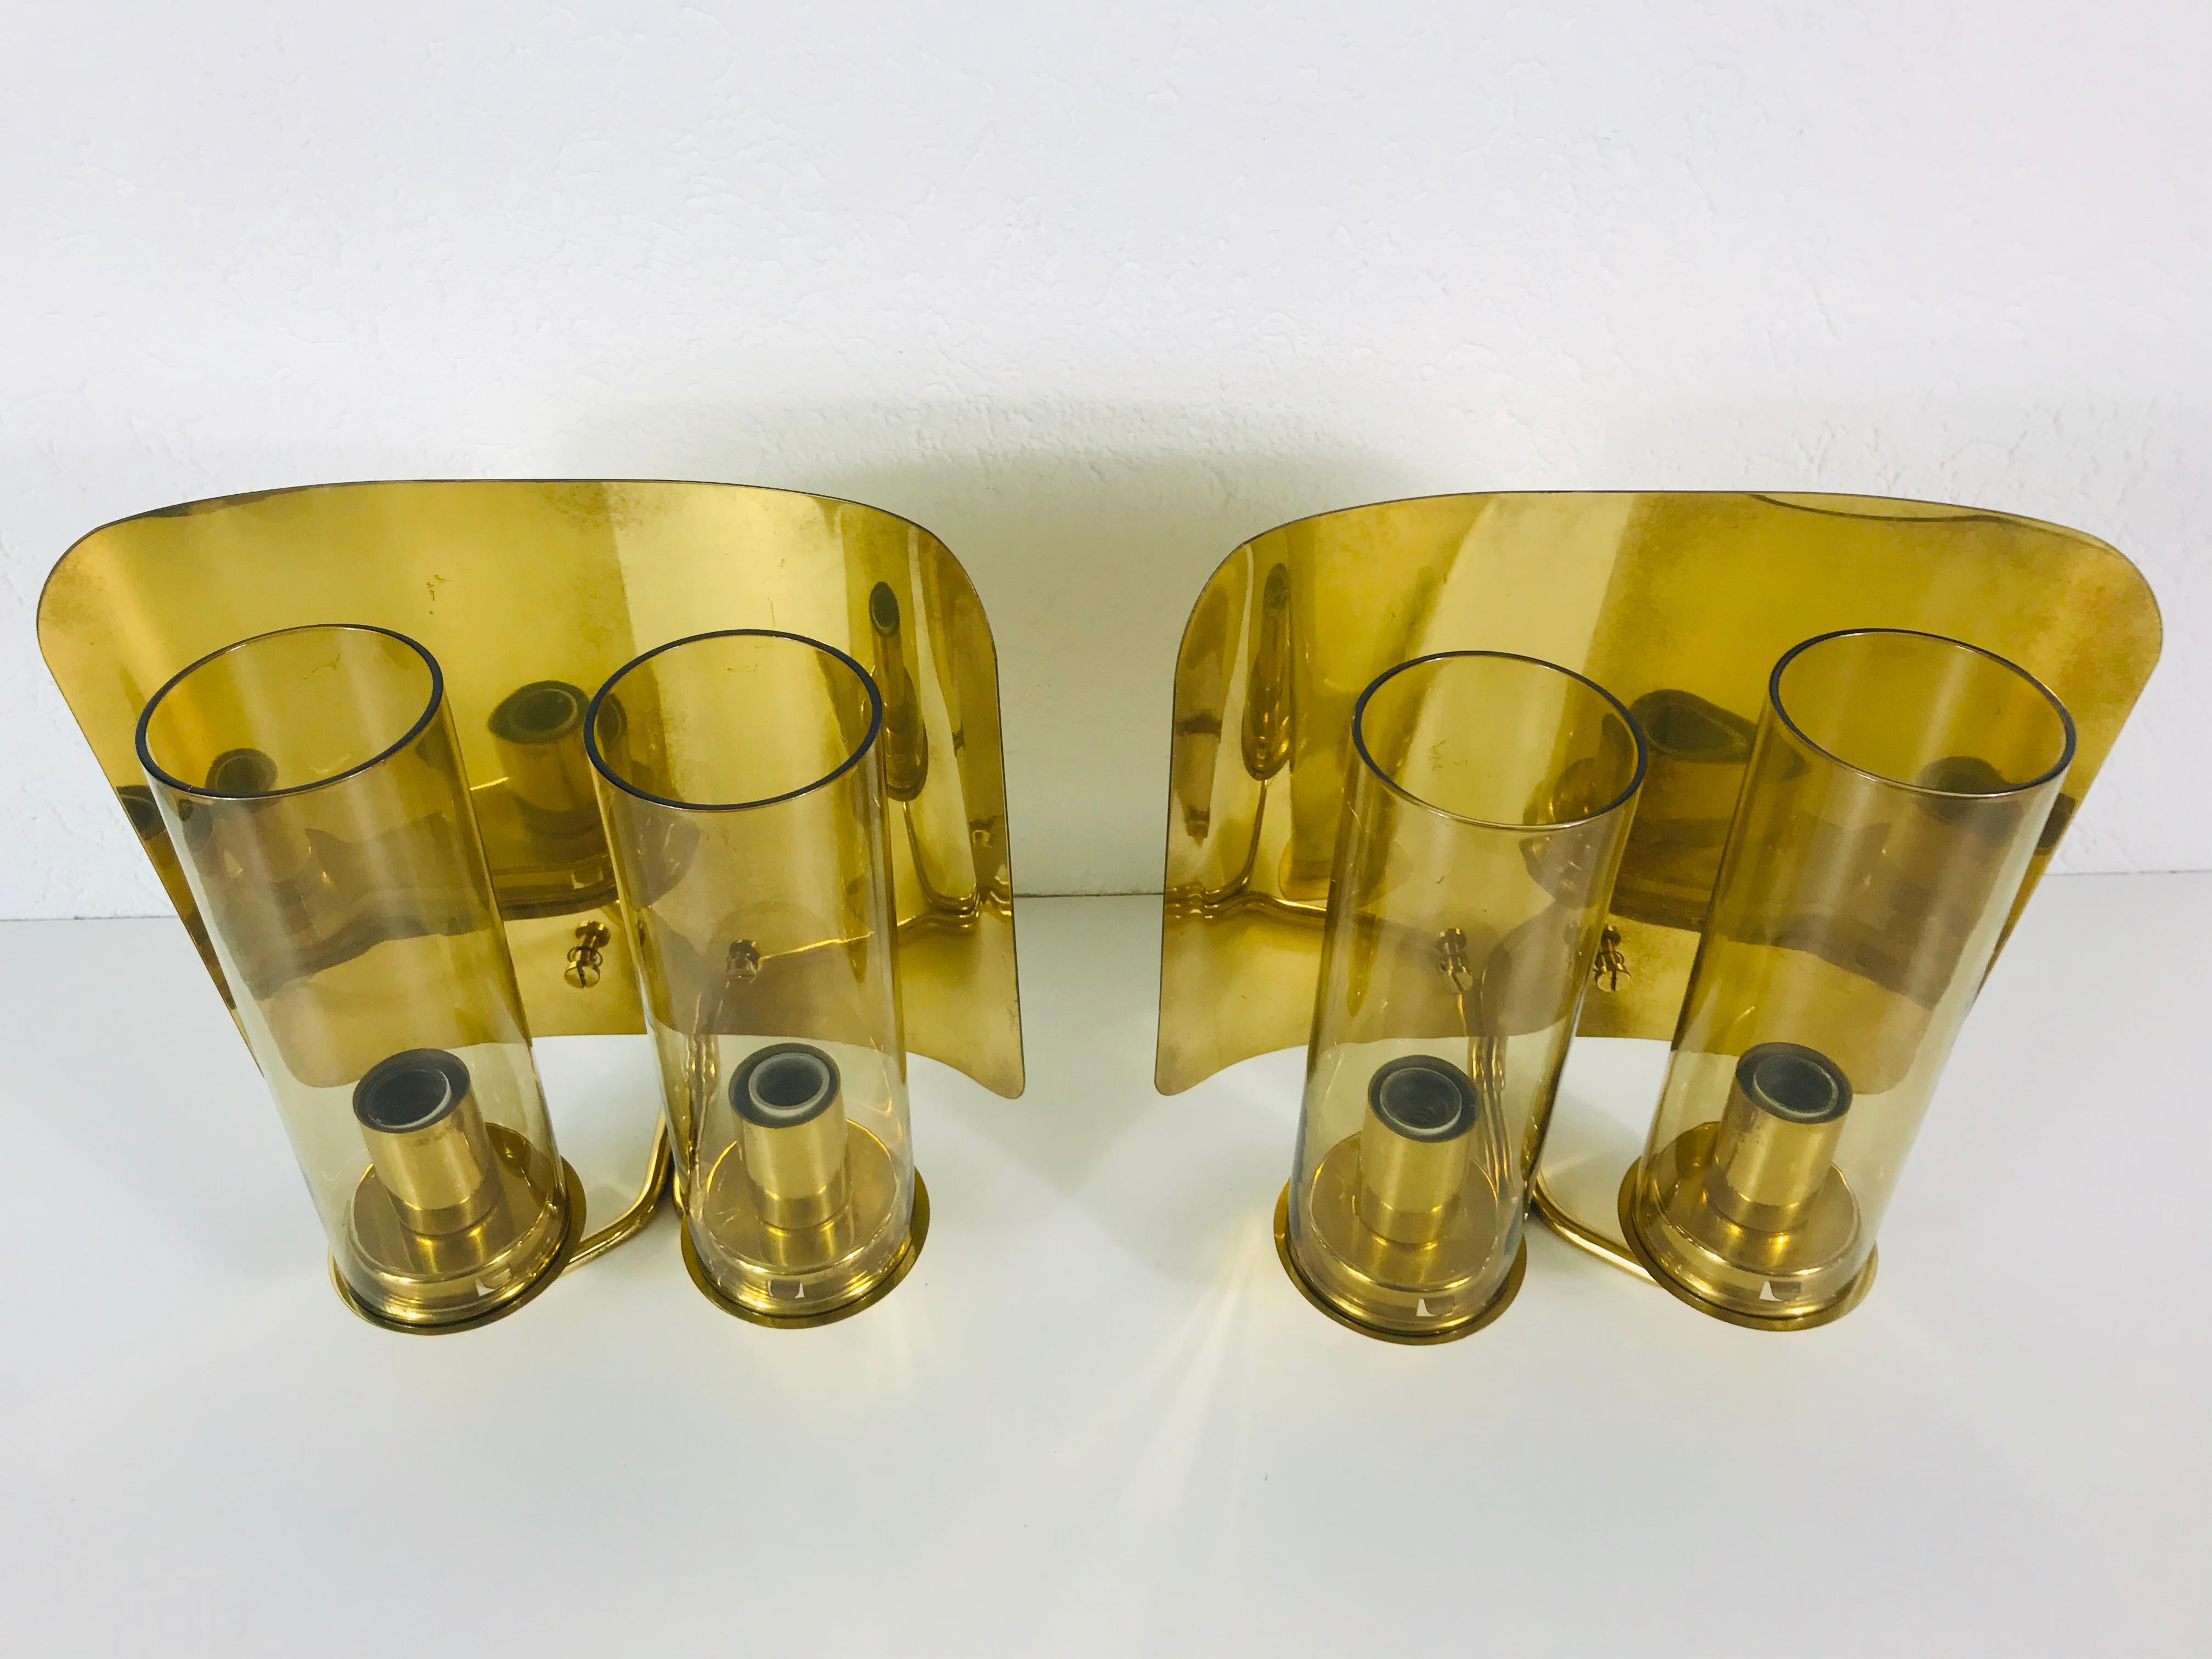 Swedish Pair of Mid-Century Modern Brass Sconces by Hans-Agne Jakobsson, Sweden, 1960s For Sale